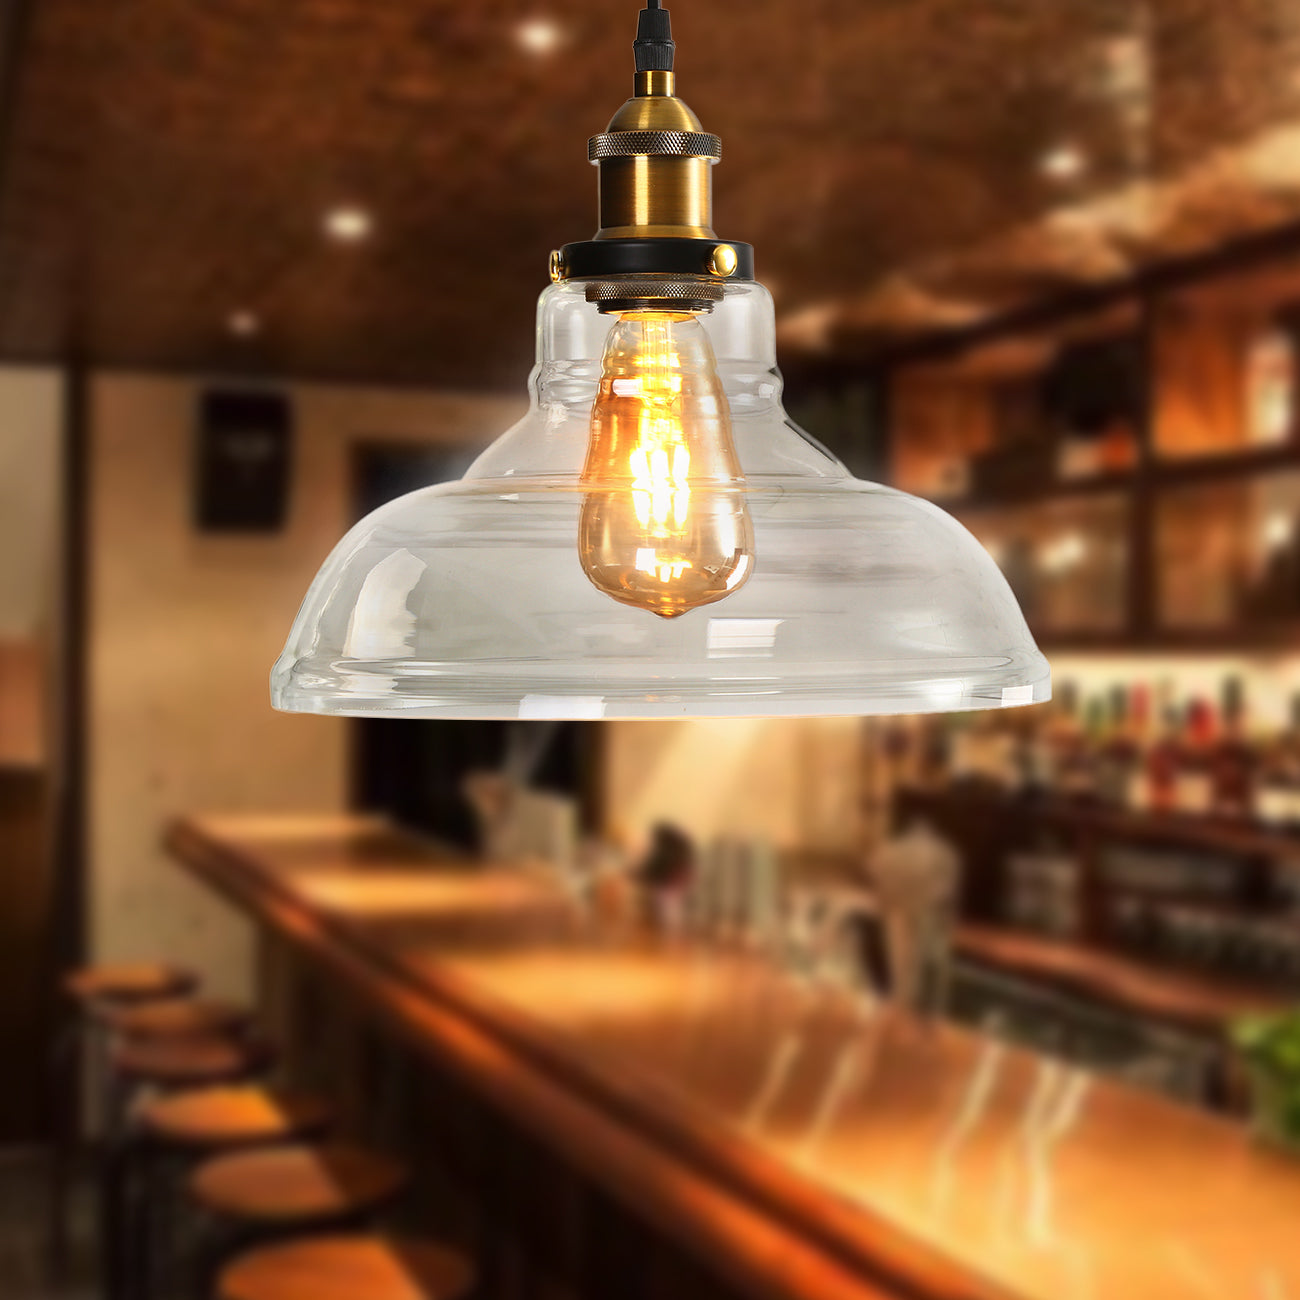 Retro Clear Glass Ceiling Pendant Industrial Light Shade Chandelier with Bulb hello-826